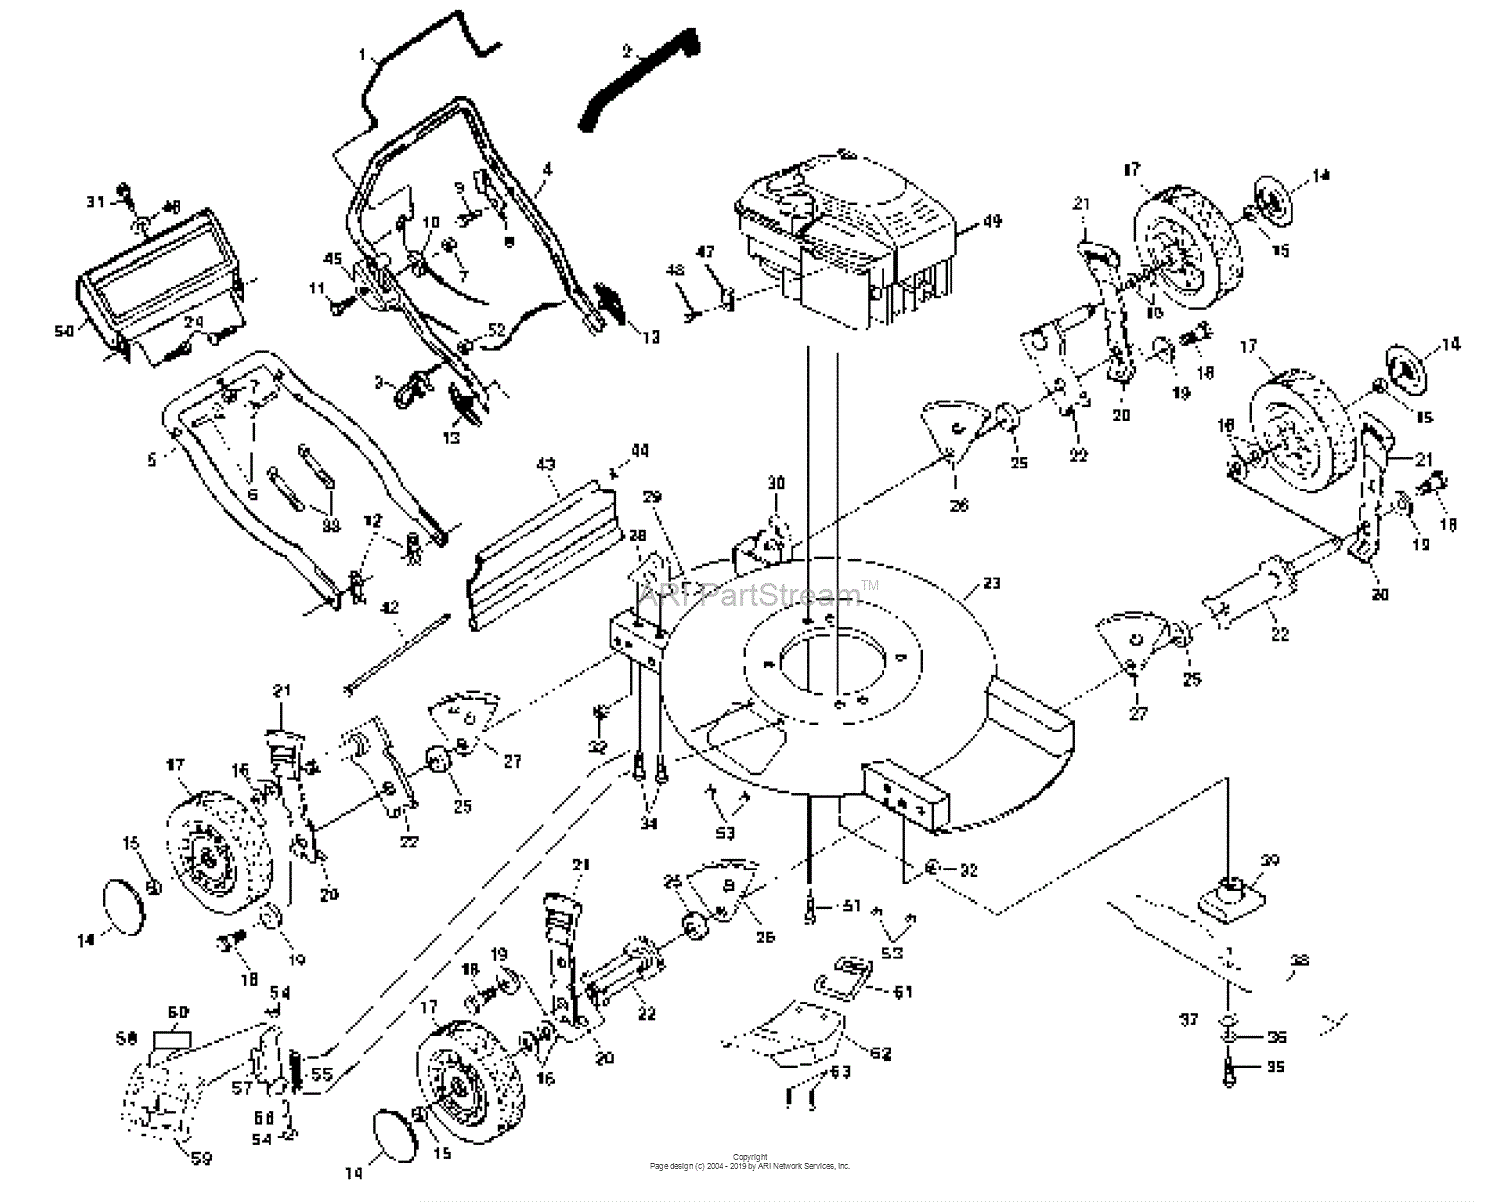 Husqvarna 51 MD (954065801A) (1994-07) Parts Diagram for General Assembly